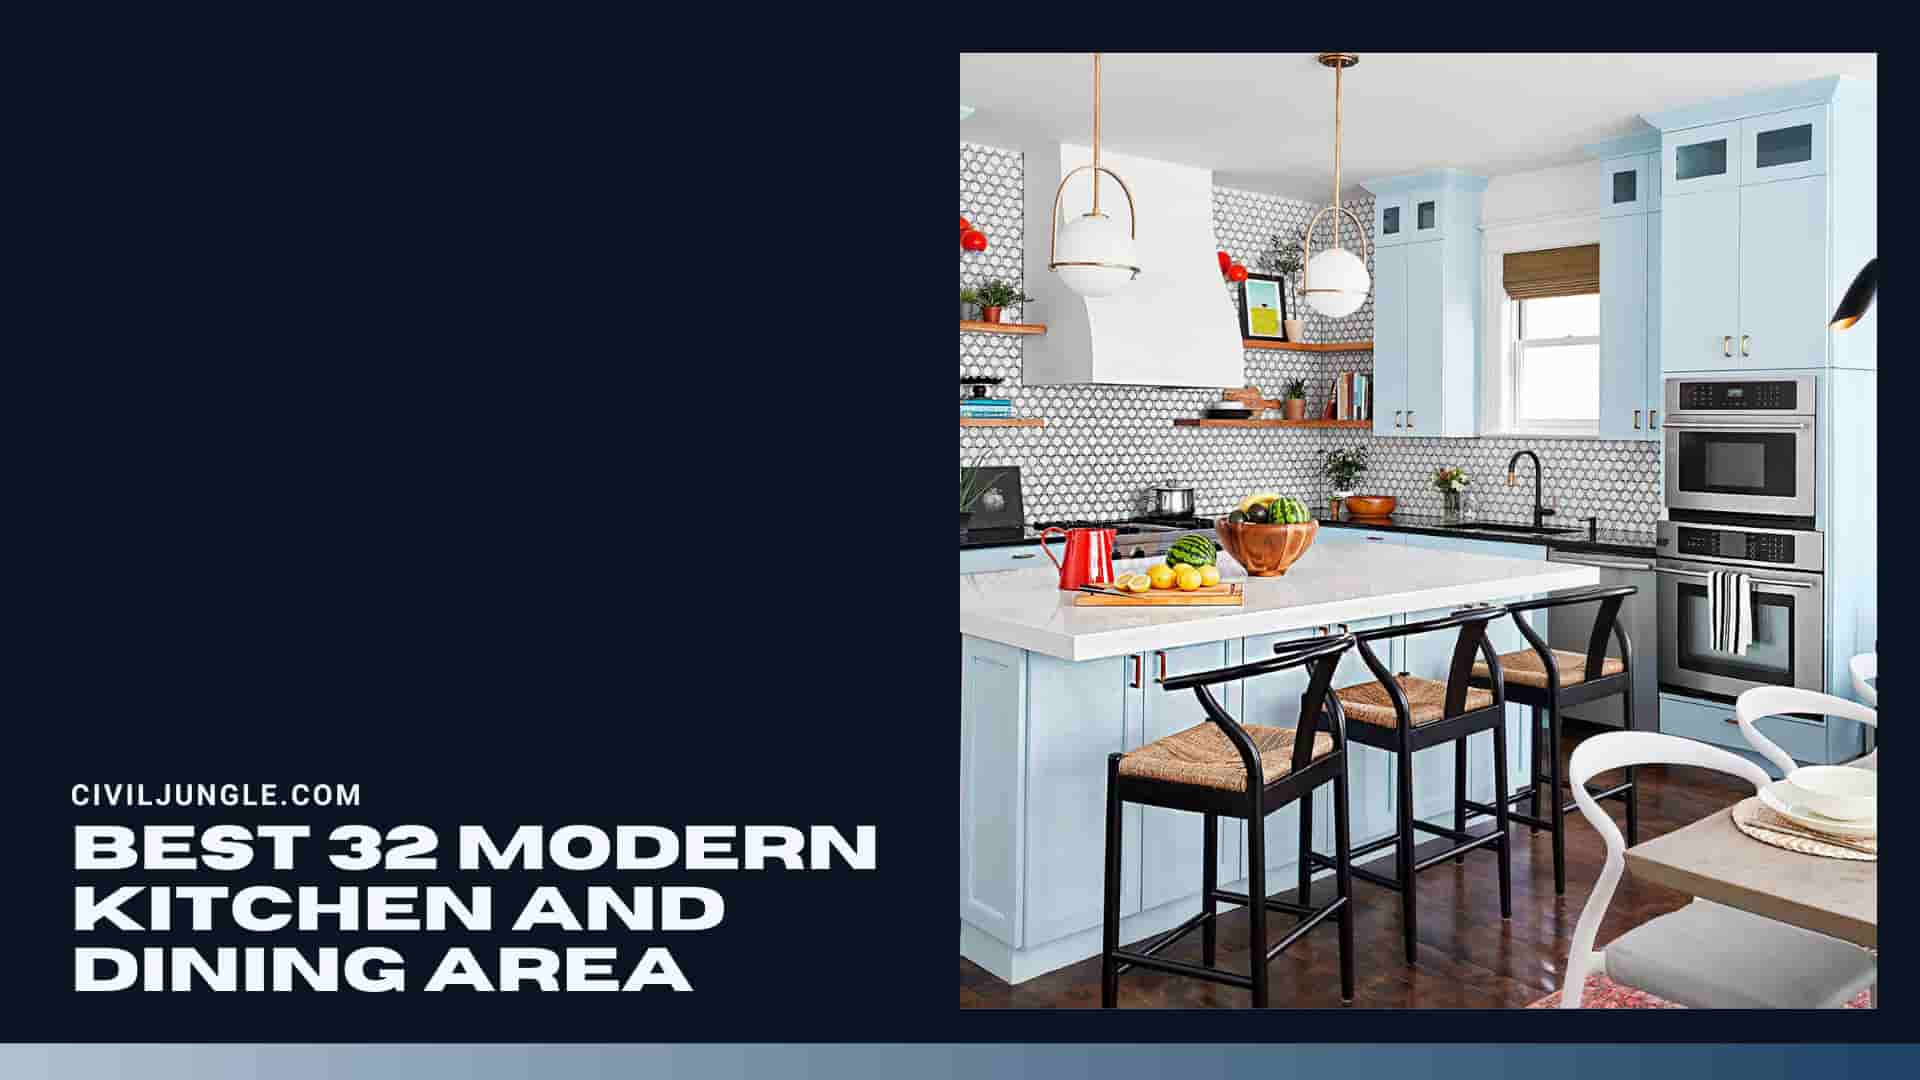 Best 32 Modern Kitchen and Dining Area